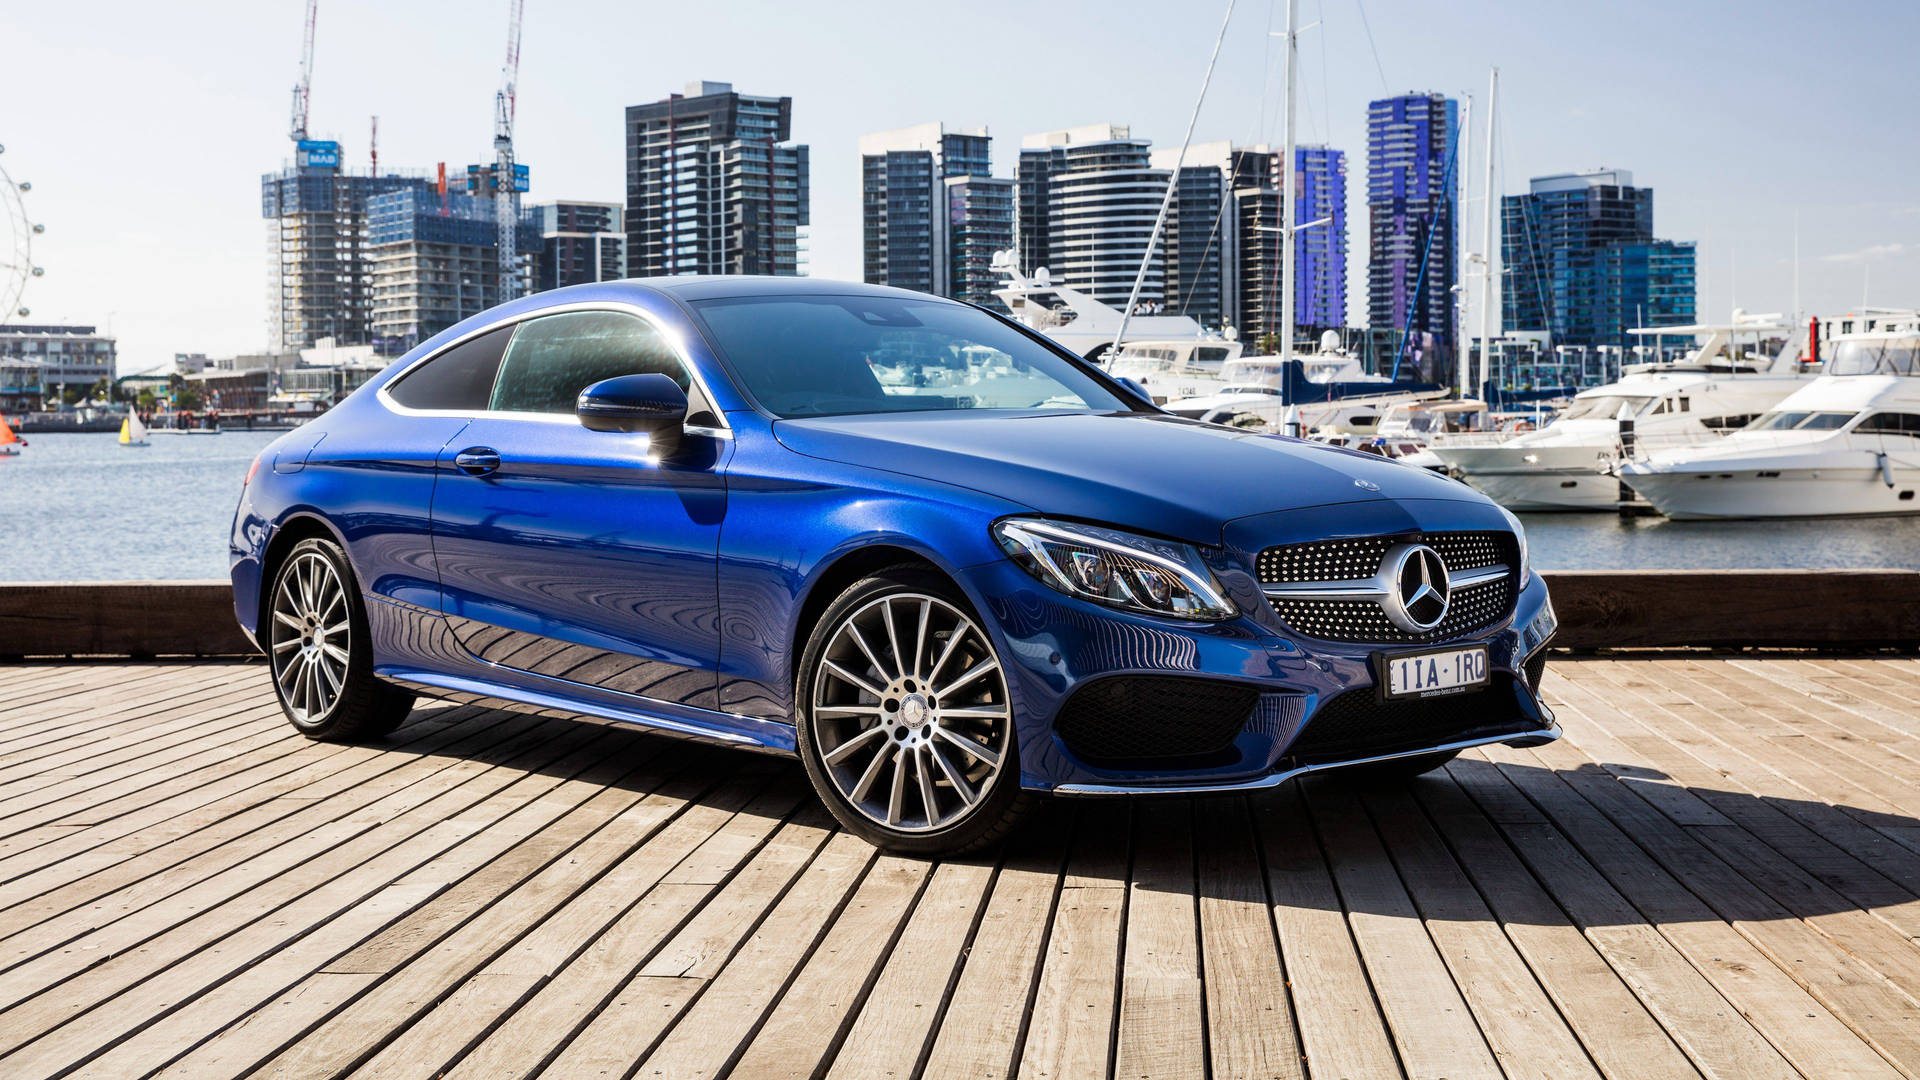 Luxurious Mercedes-benz C300 At The Dockside